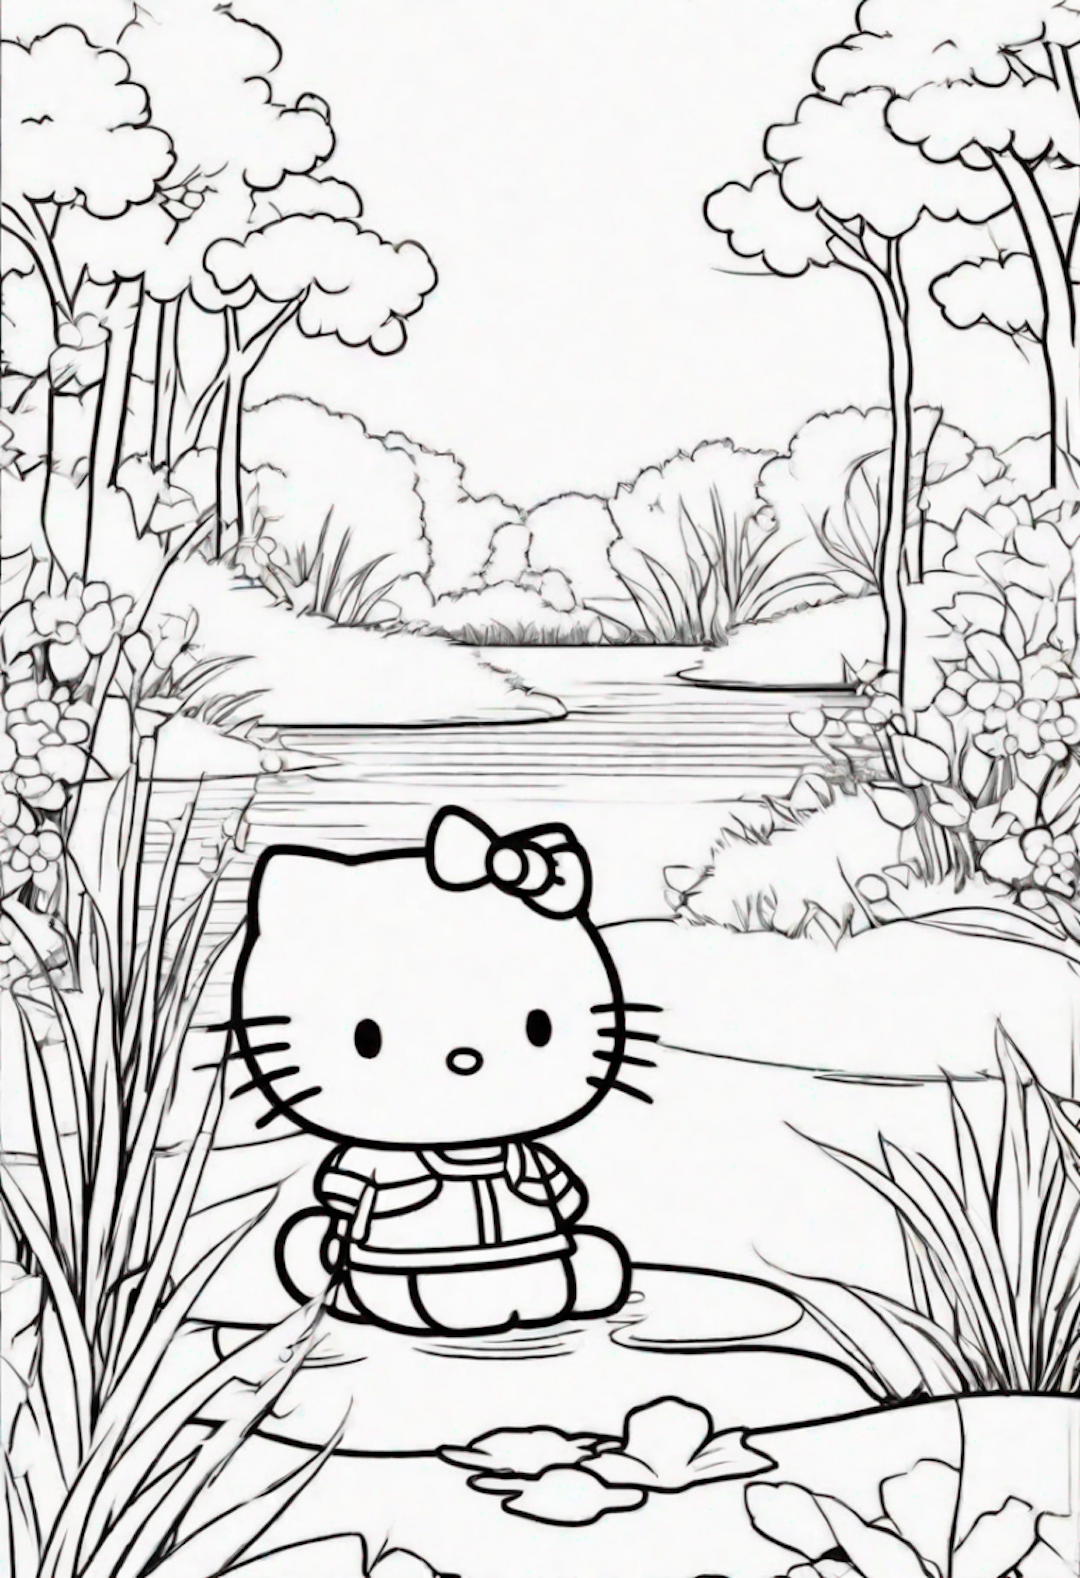 Hello Kitty’s Peaceful River Adventure coloring pages